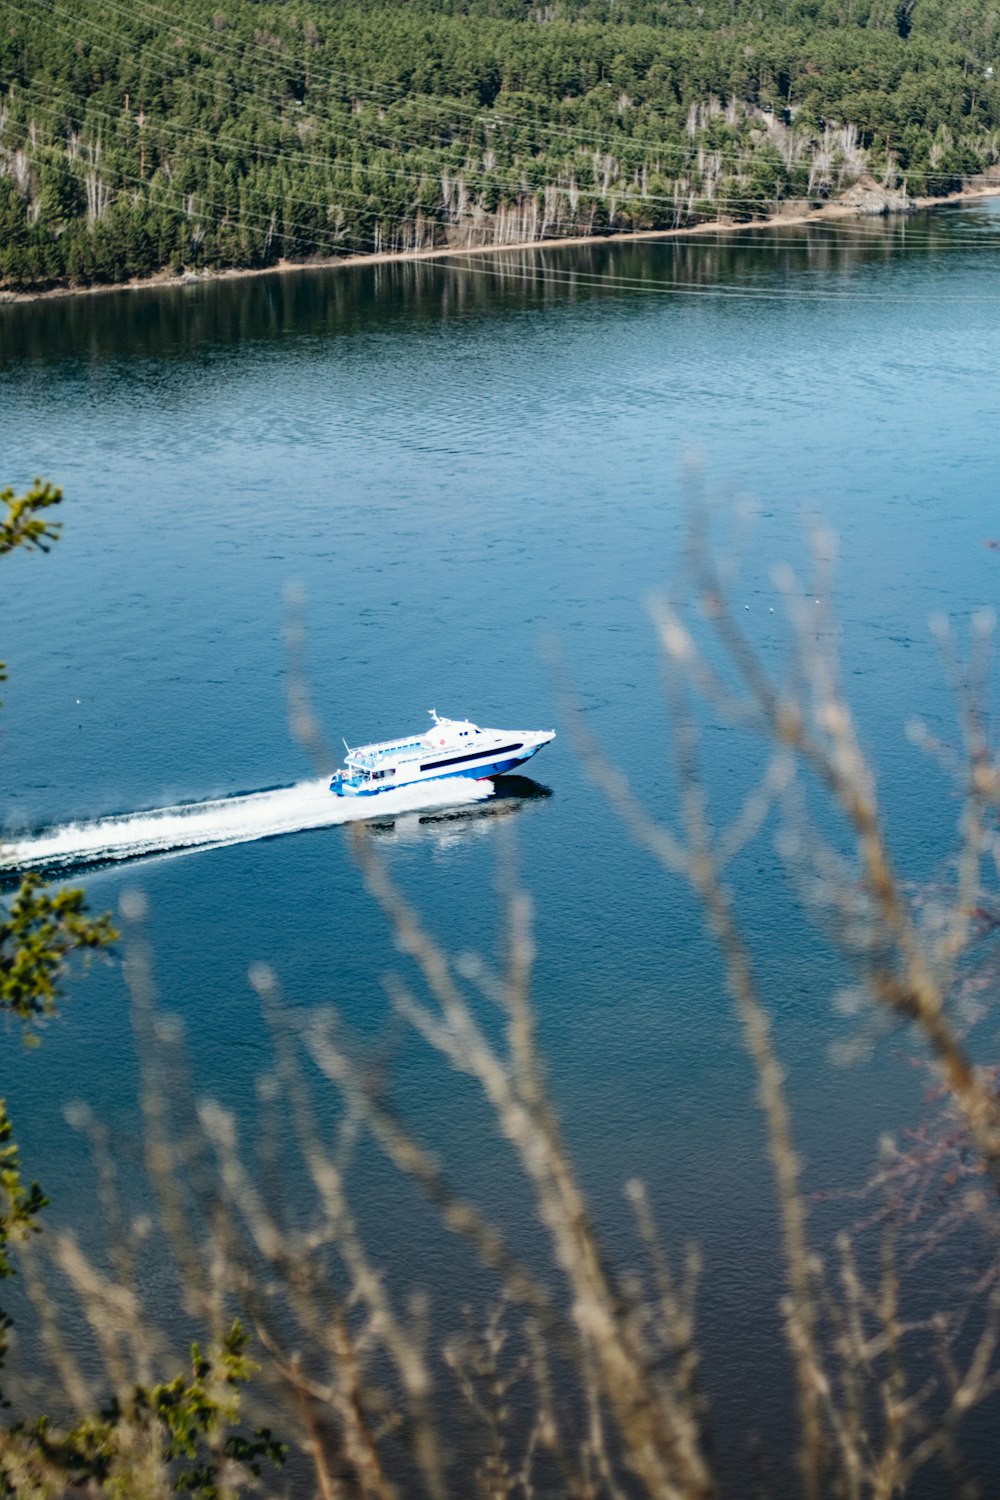 a boat is traveling on the water near a wooded area